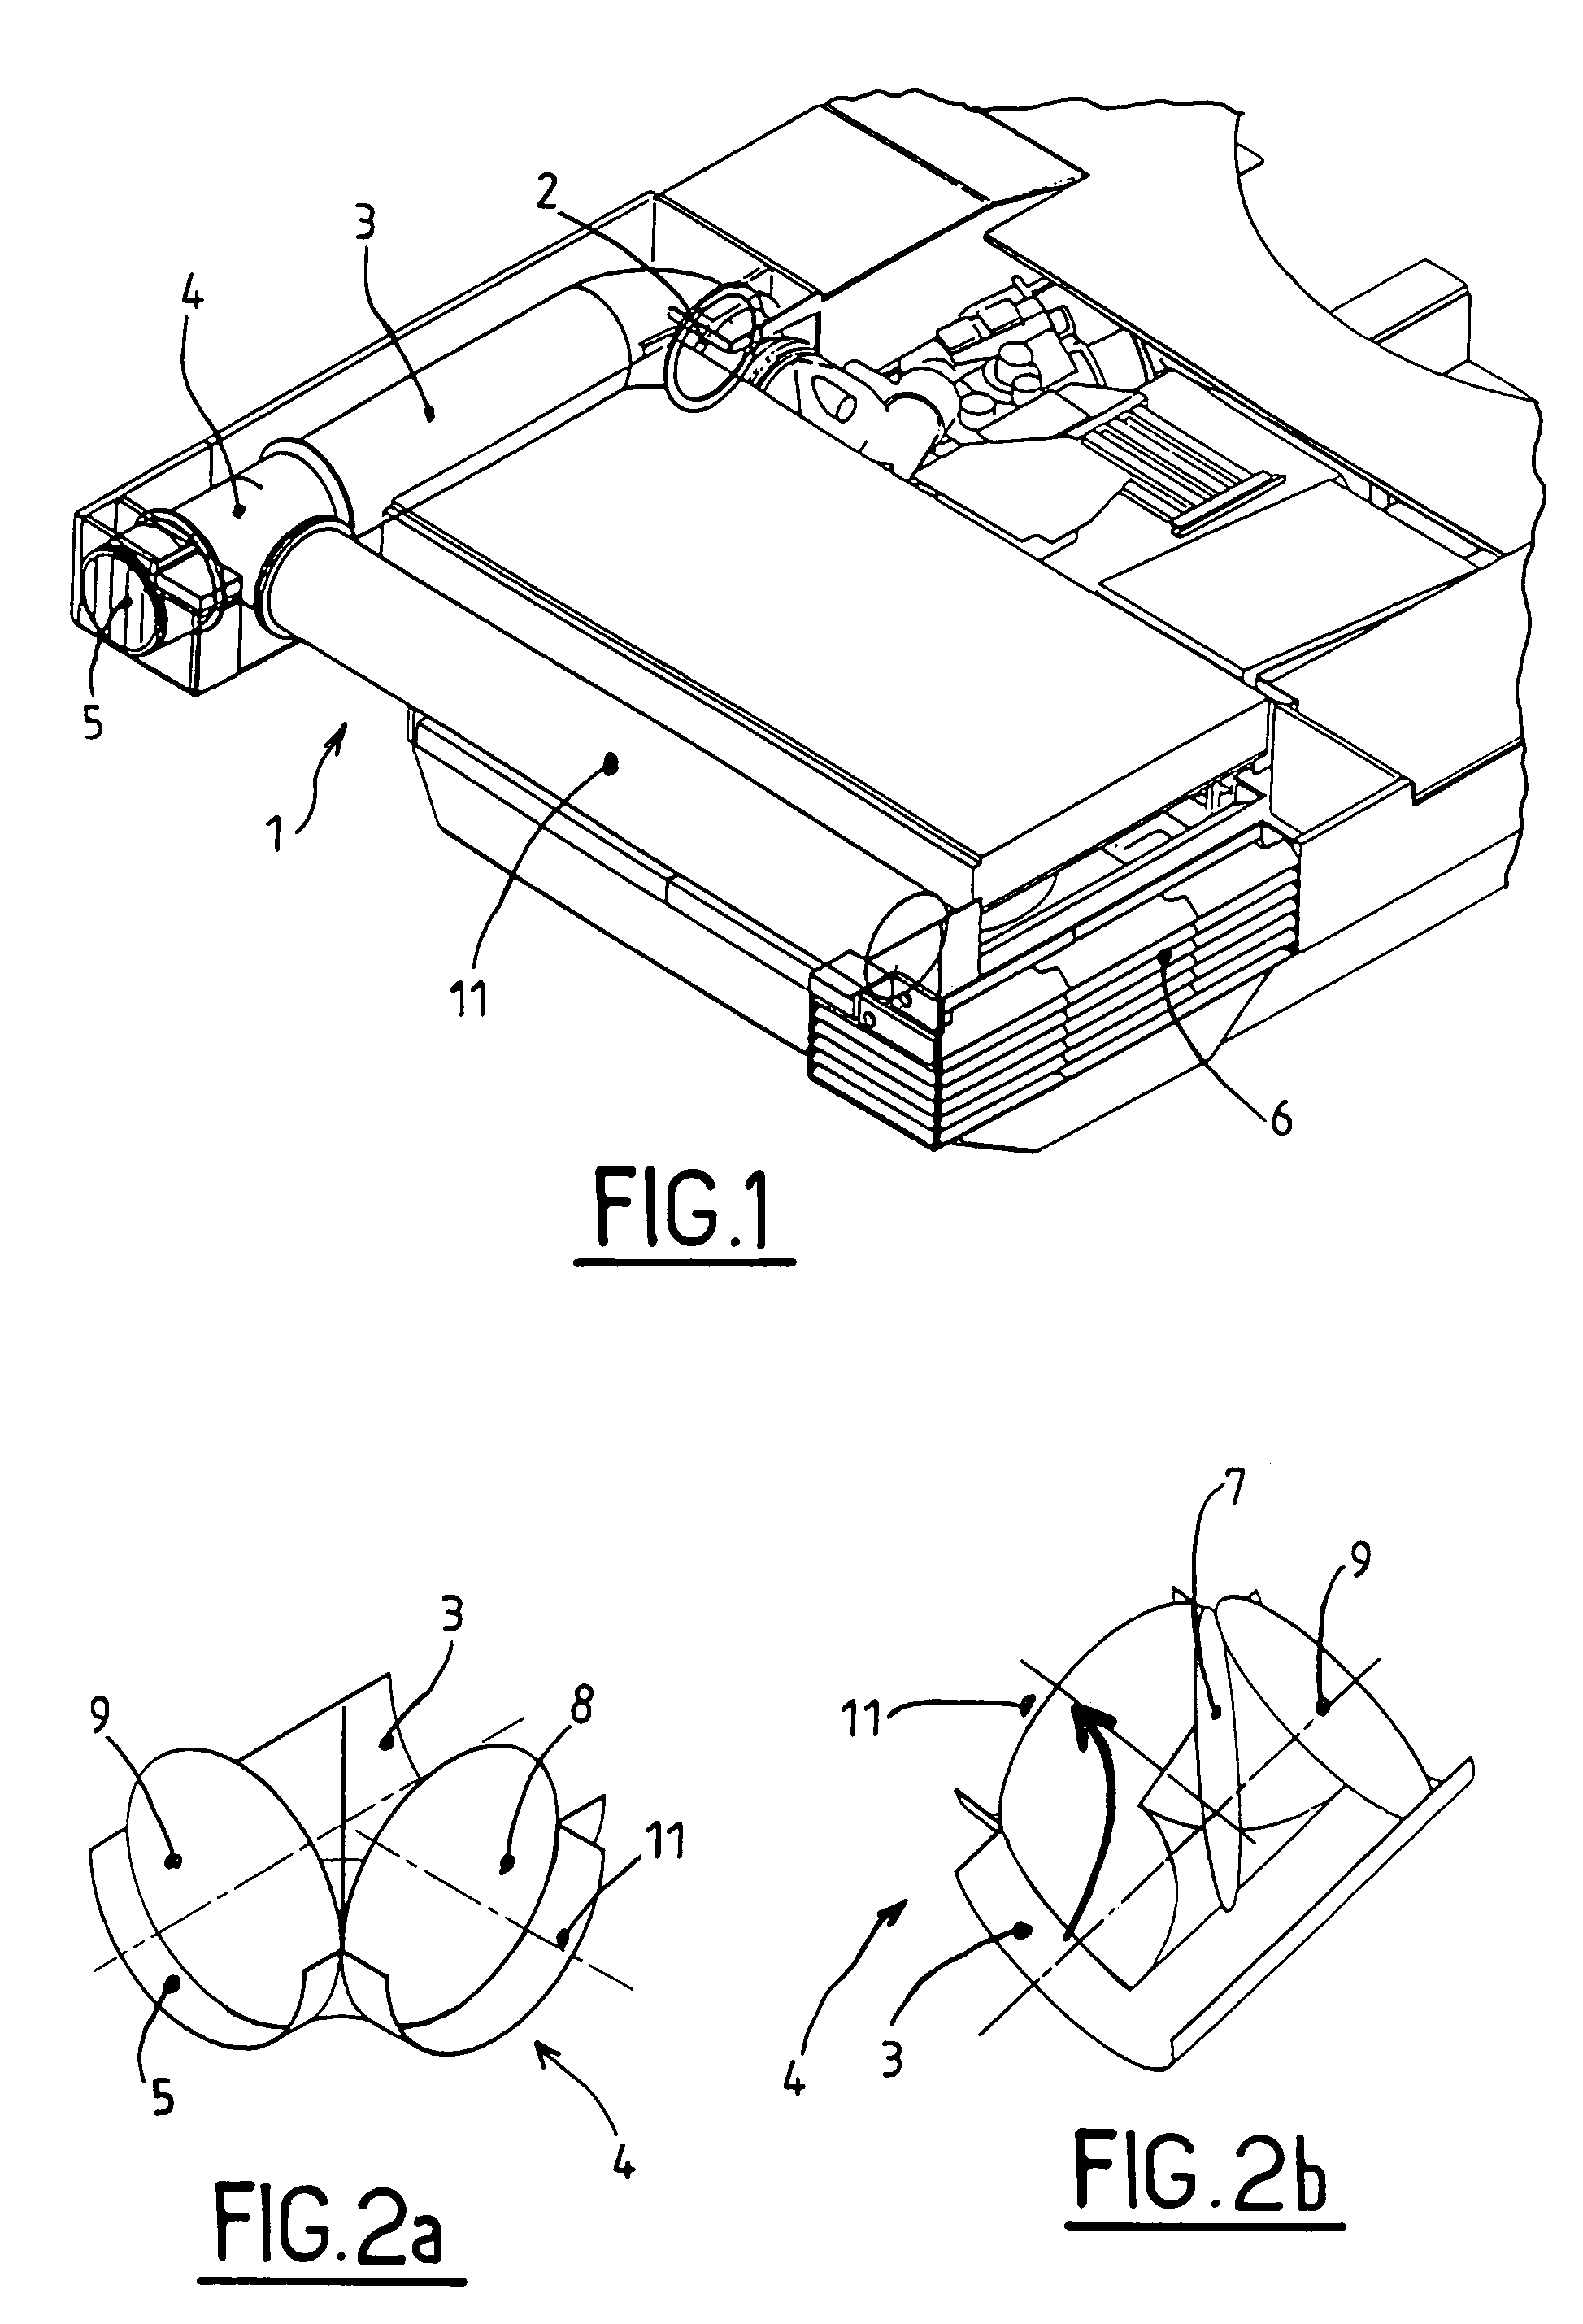 Exhaust device with or without dilution based on two controllable outputs